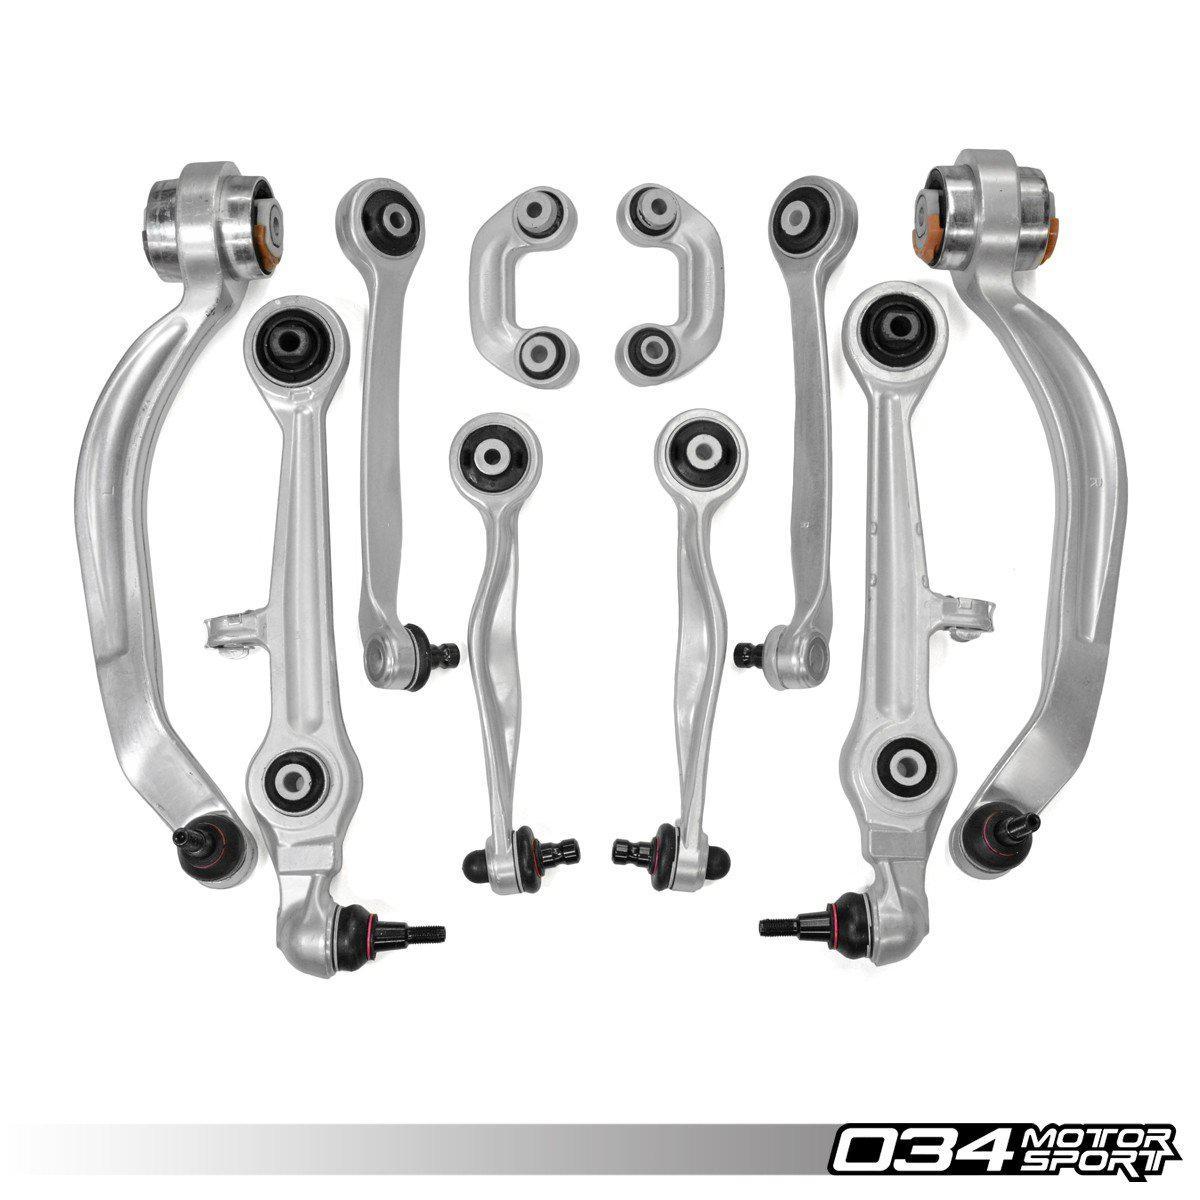 Control Arm Kit, Density Line, Early B5/C5 Audi S4/RS4 & A6/S6/RS6, B5 Volkswagen Passat With Aluminum Uprights-A Little Tuning Co